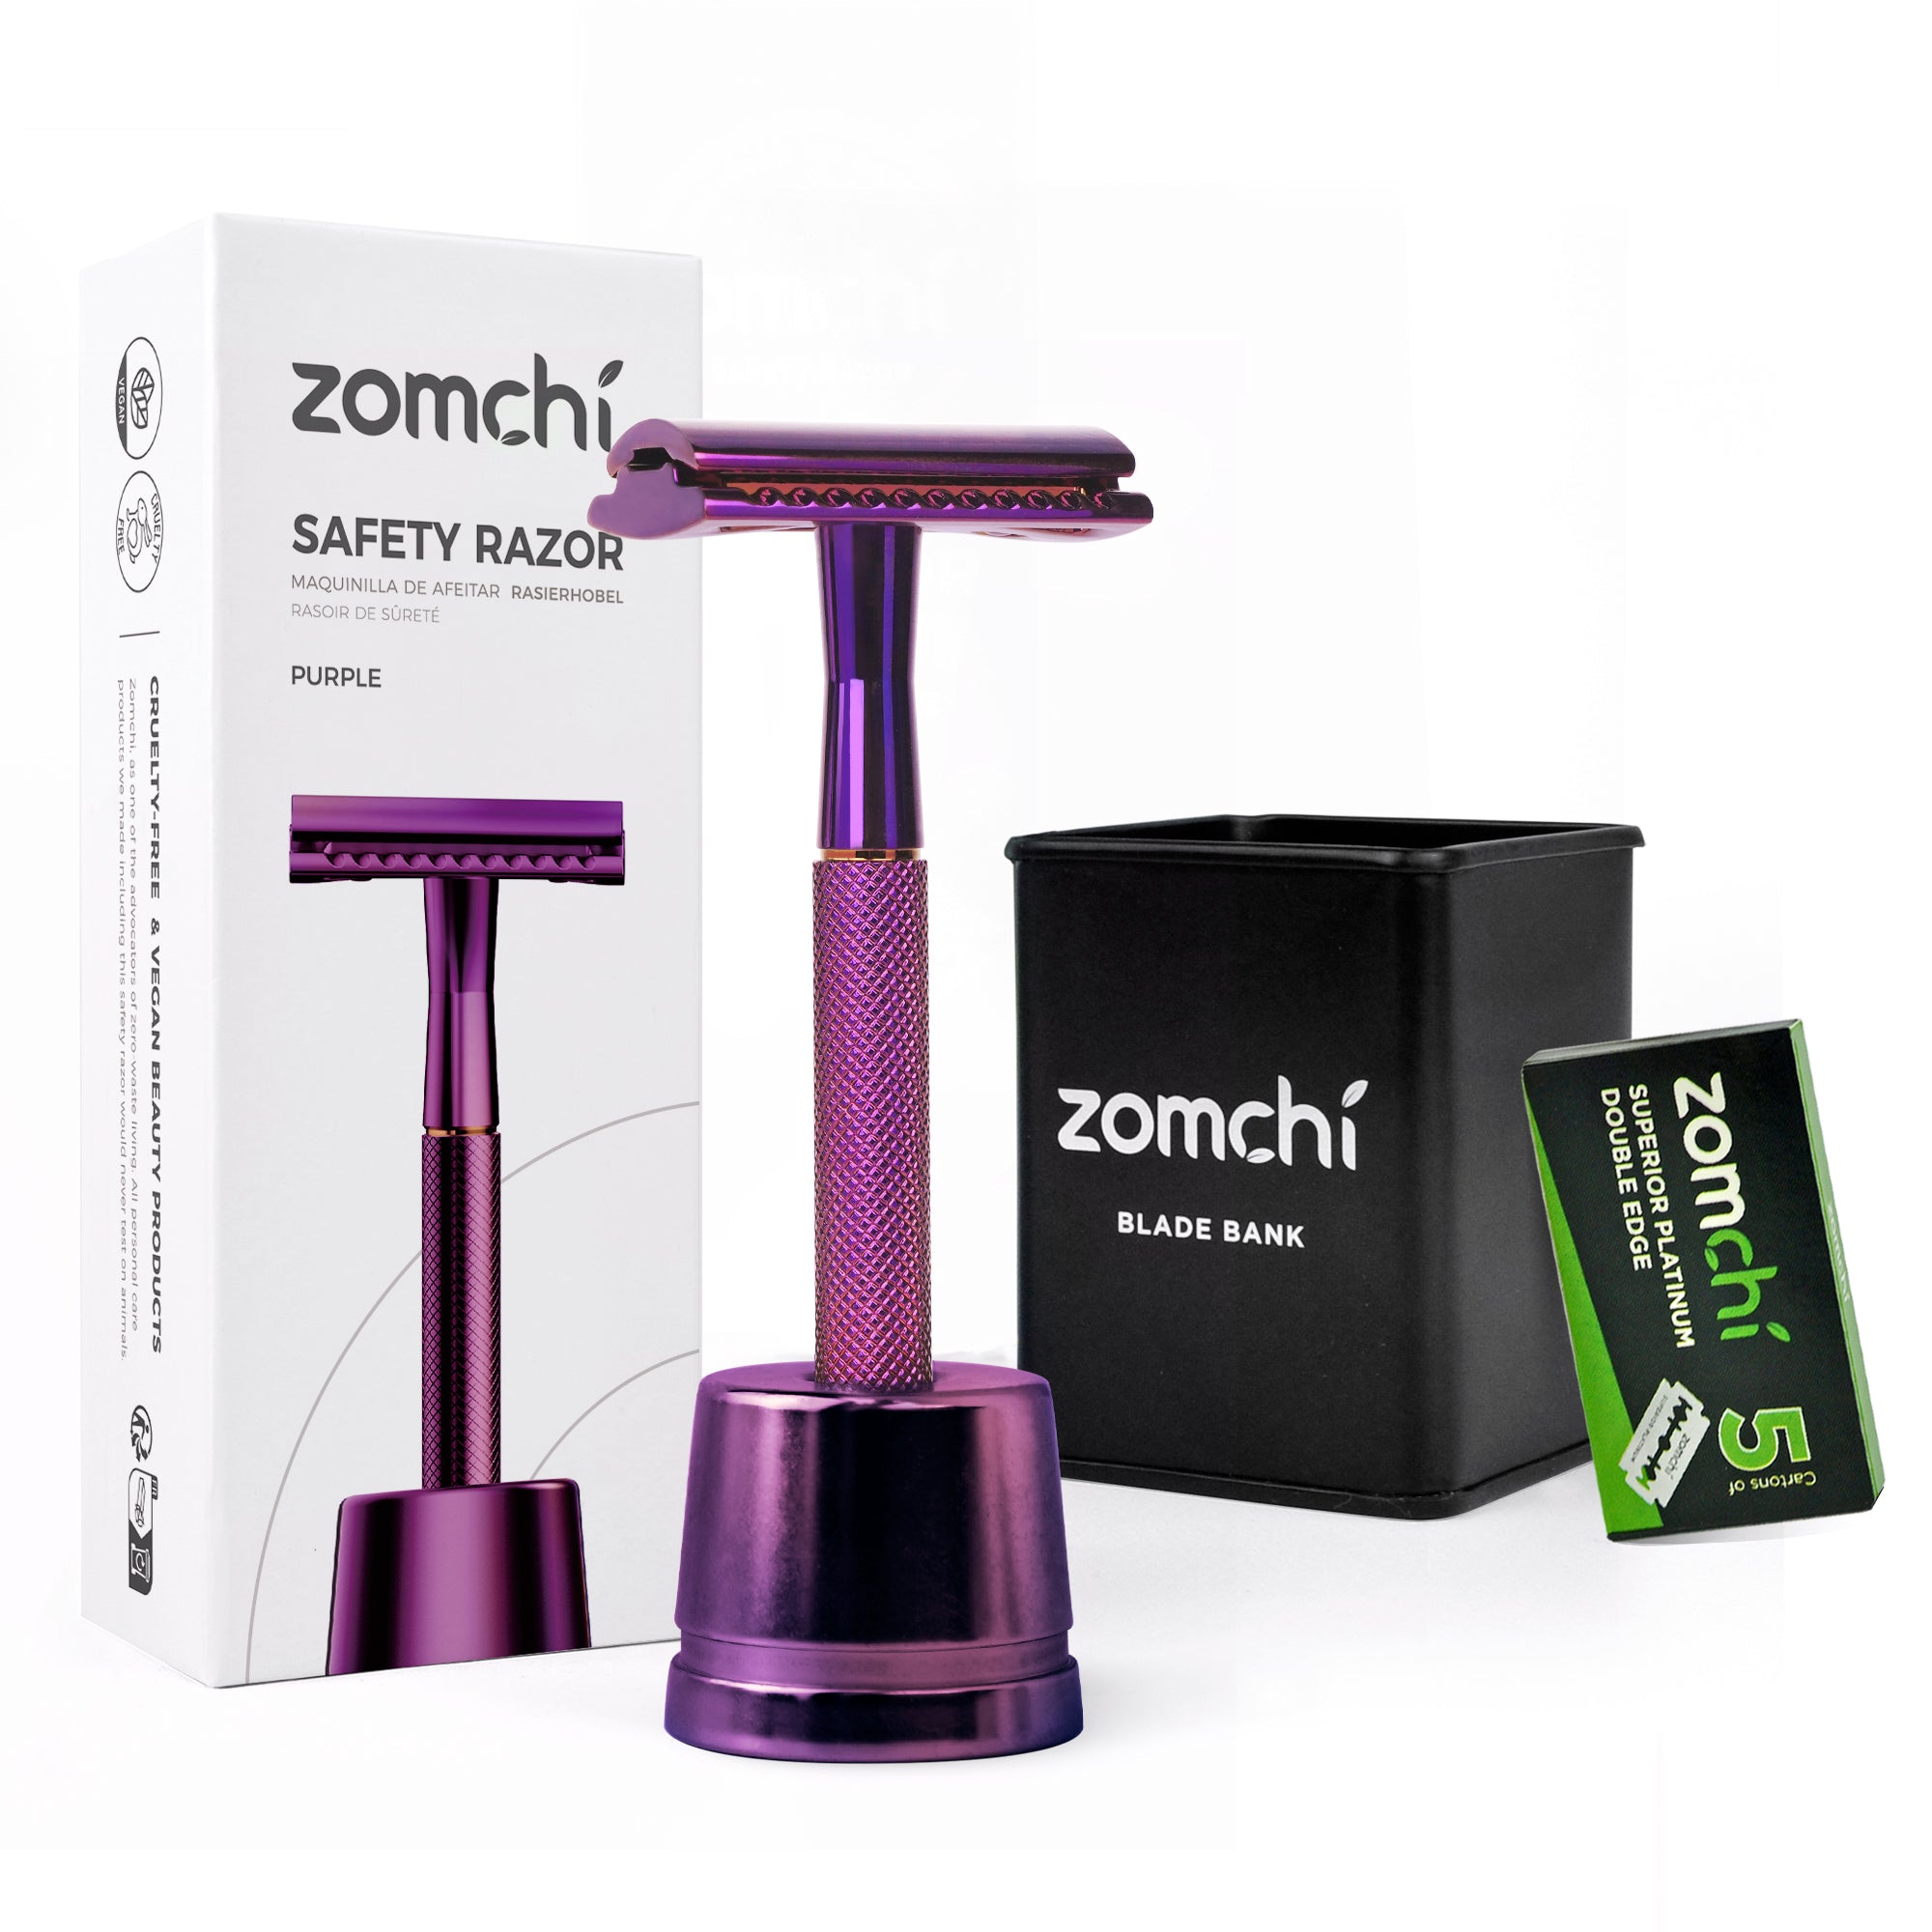 Purple Safety Razor With Stand And Banks And 5 Counts Blades